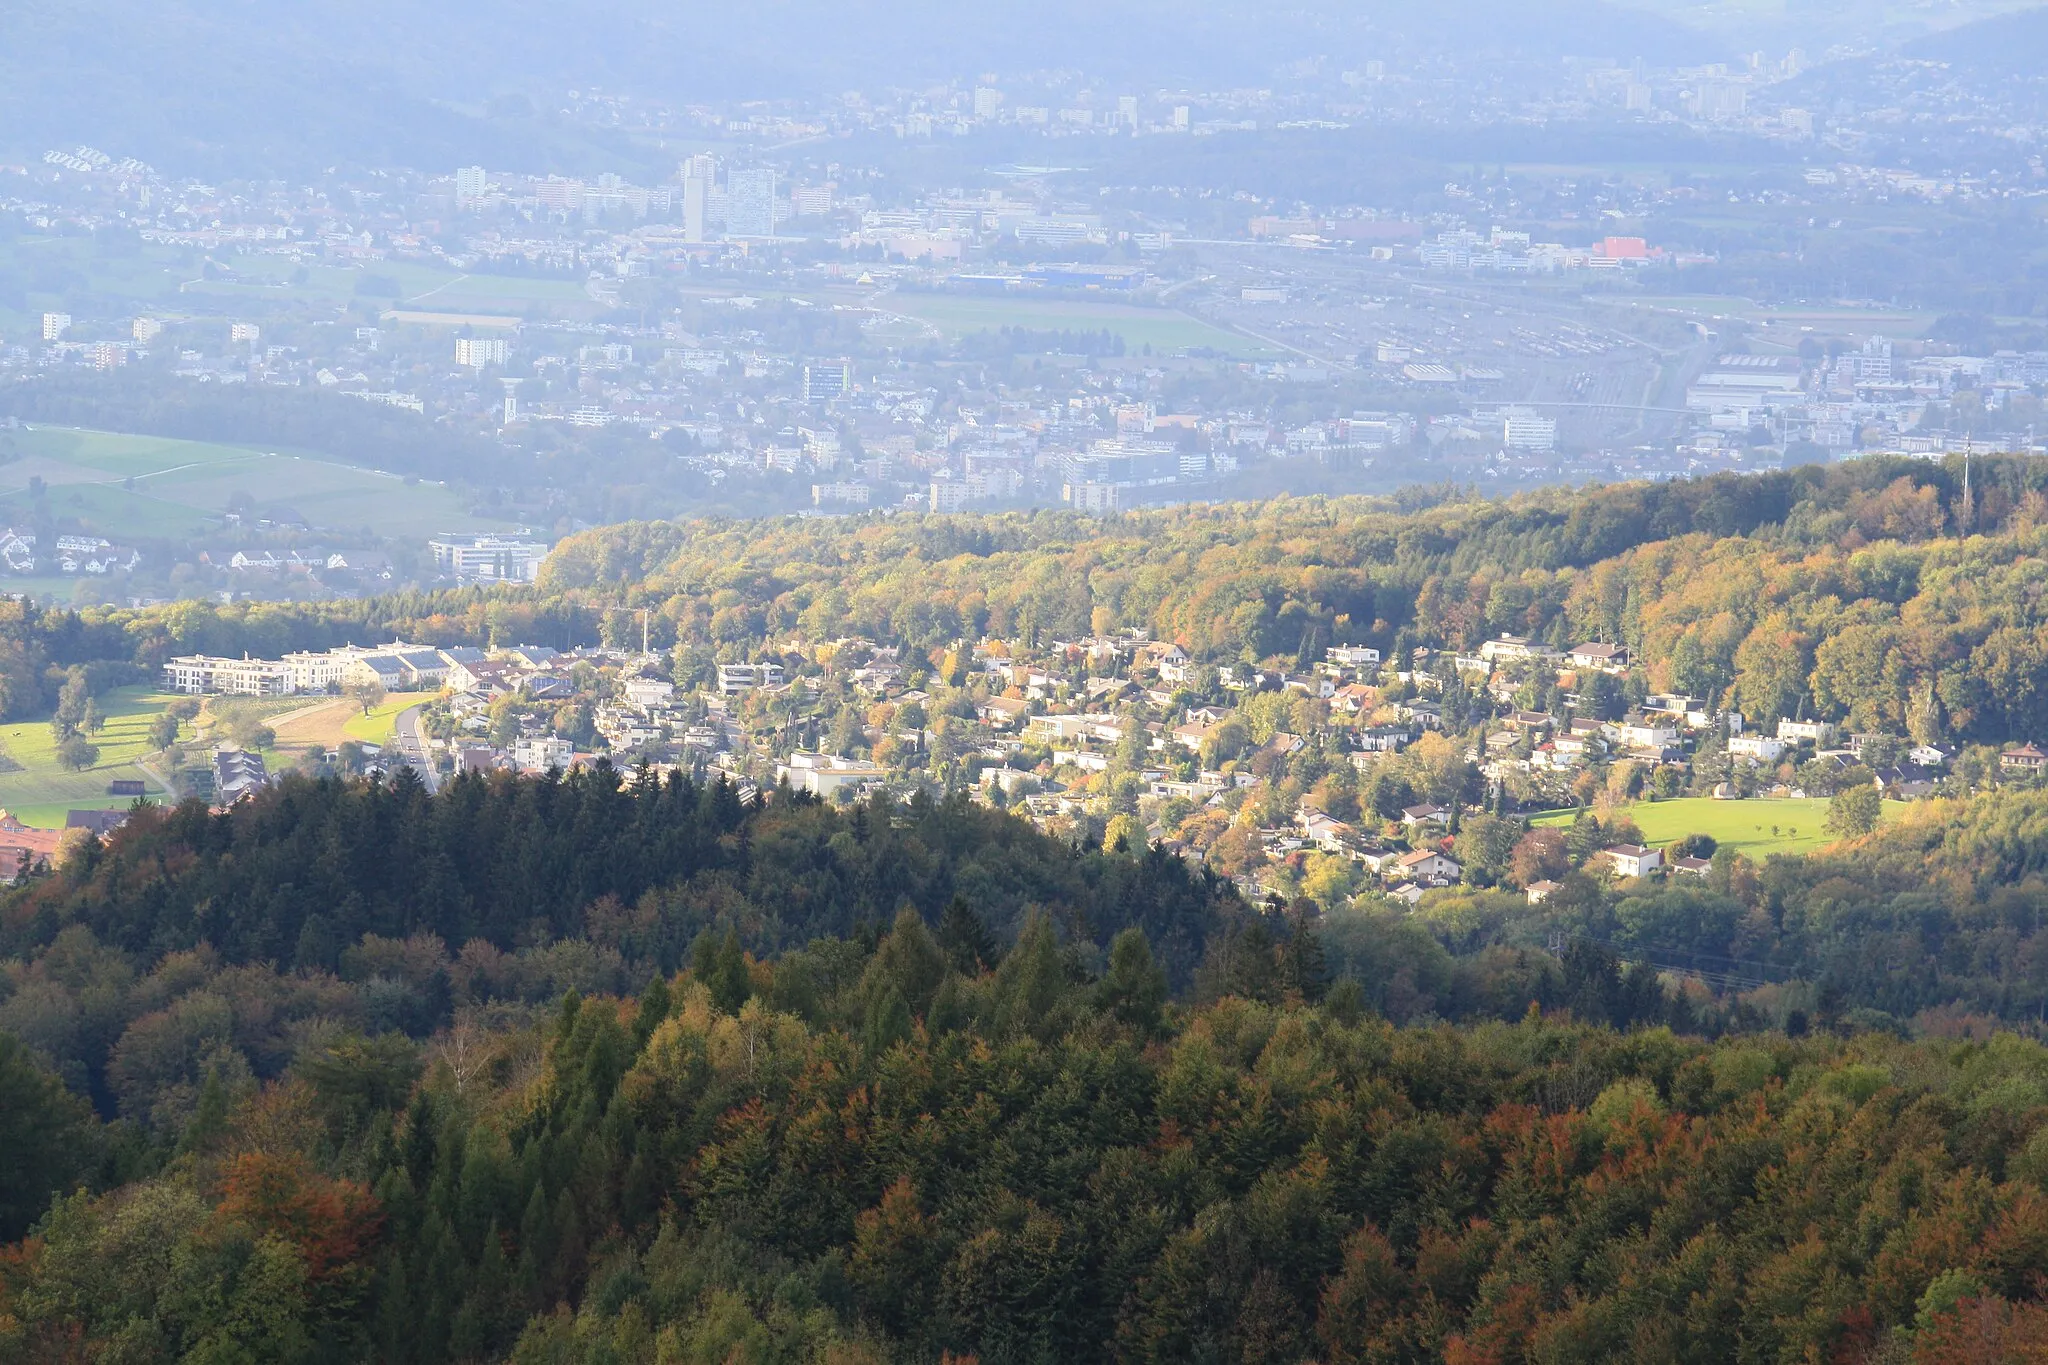 Photo showing: Uitikon-Waldegg, as seen from Uetliberg Aussichtsturm, Limmattal (Limmat Valley) in the background.